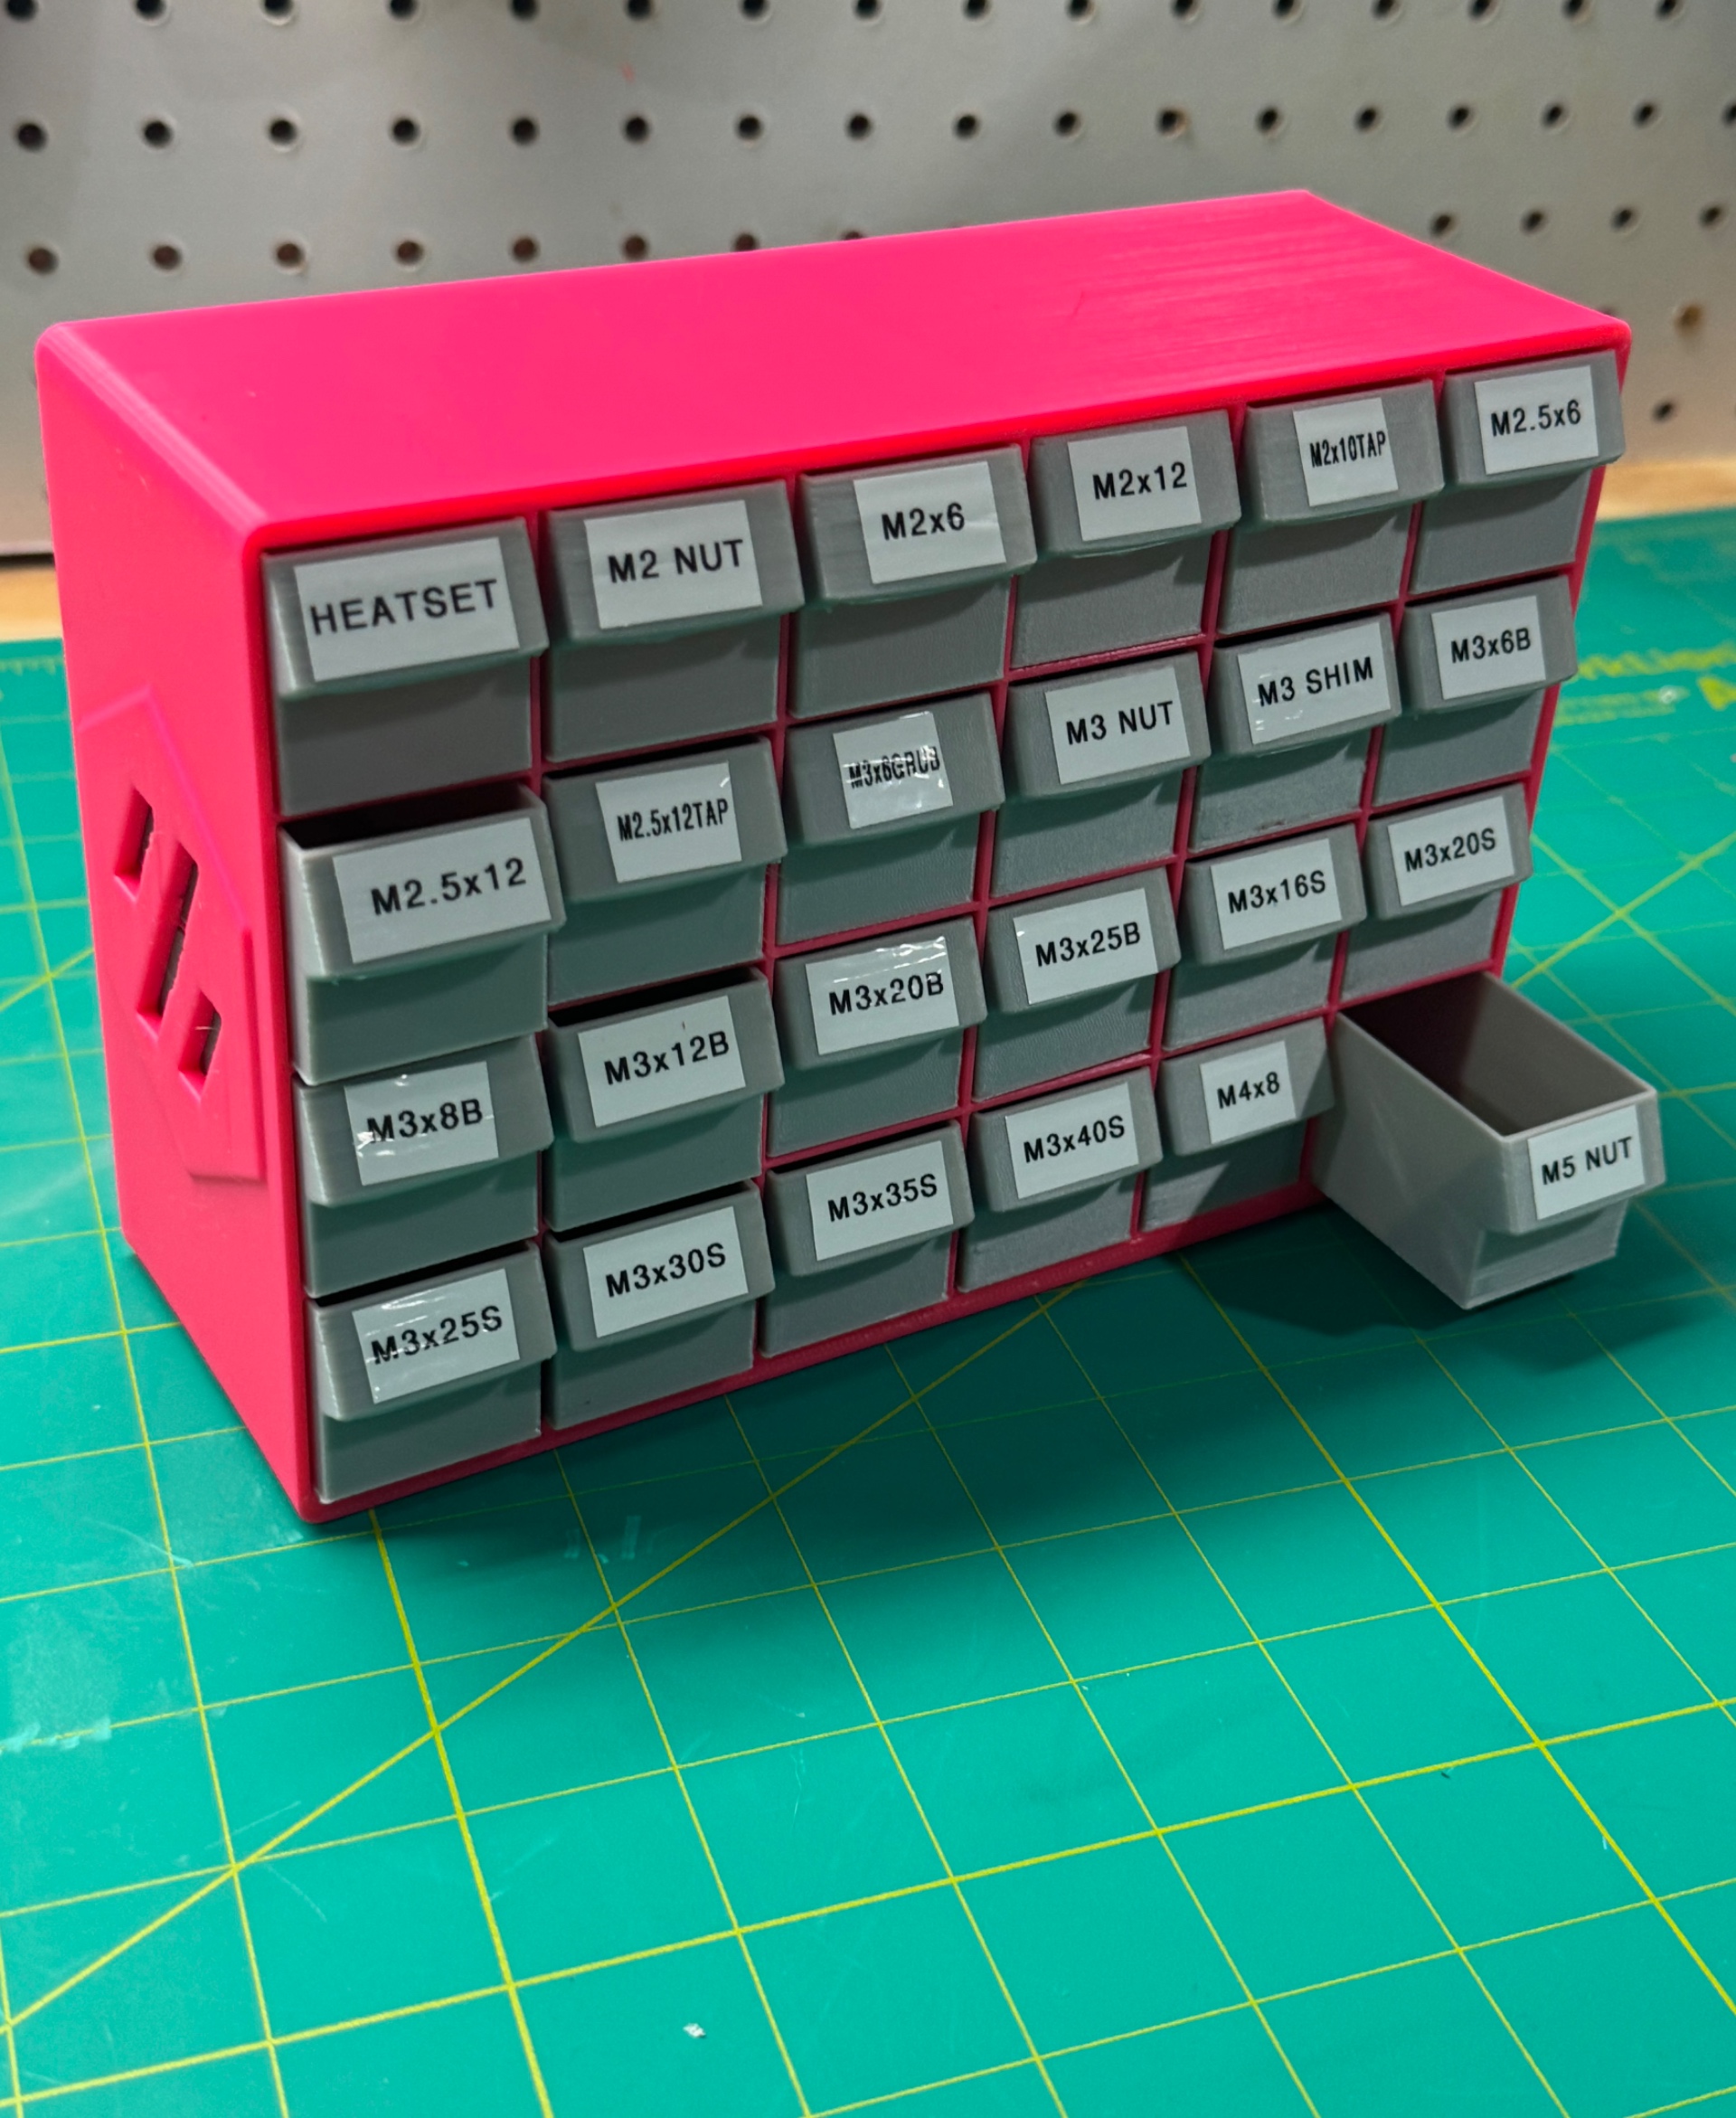 Voron Hardware Organizer EXTENDED REMIX - 3D model by Minesweep on